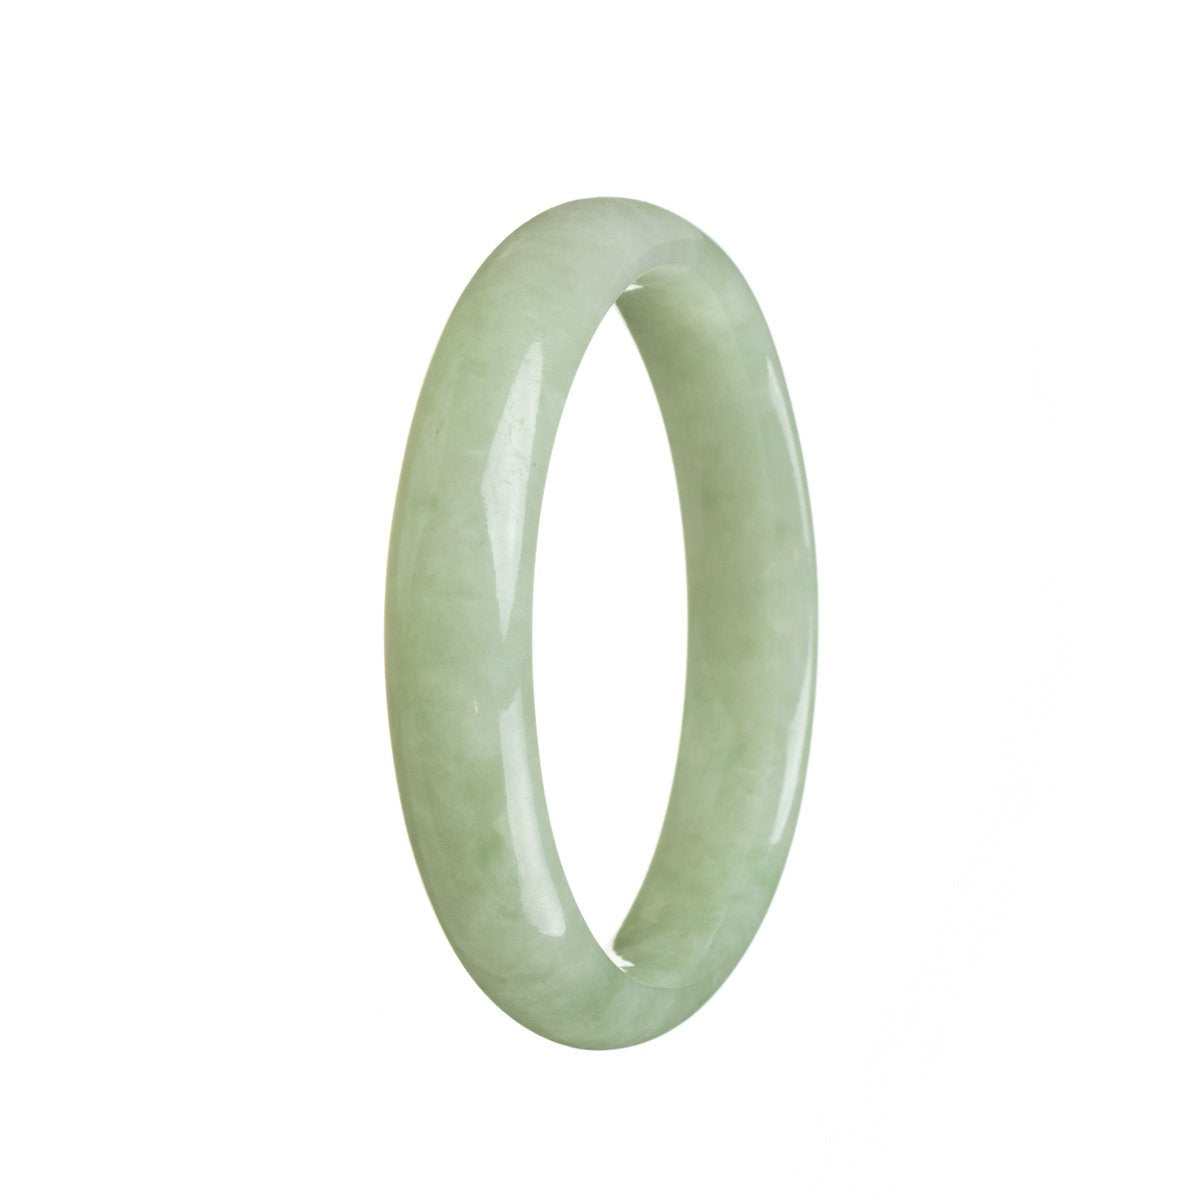 A close-up of a stunning jade bracelet in a rich olive green color, featuring a half moon design. The bracelet is made of high-quality jade and is 57mm in size. A beautiful and elegant accessory from MAYS GEMS.